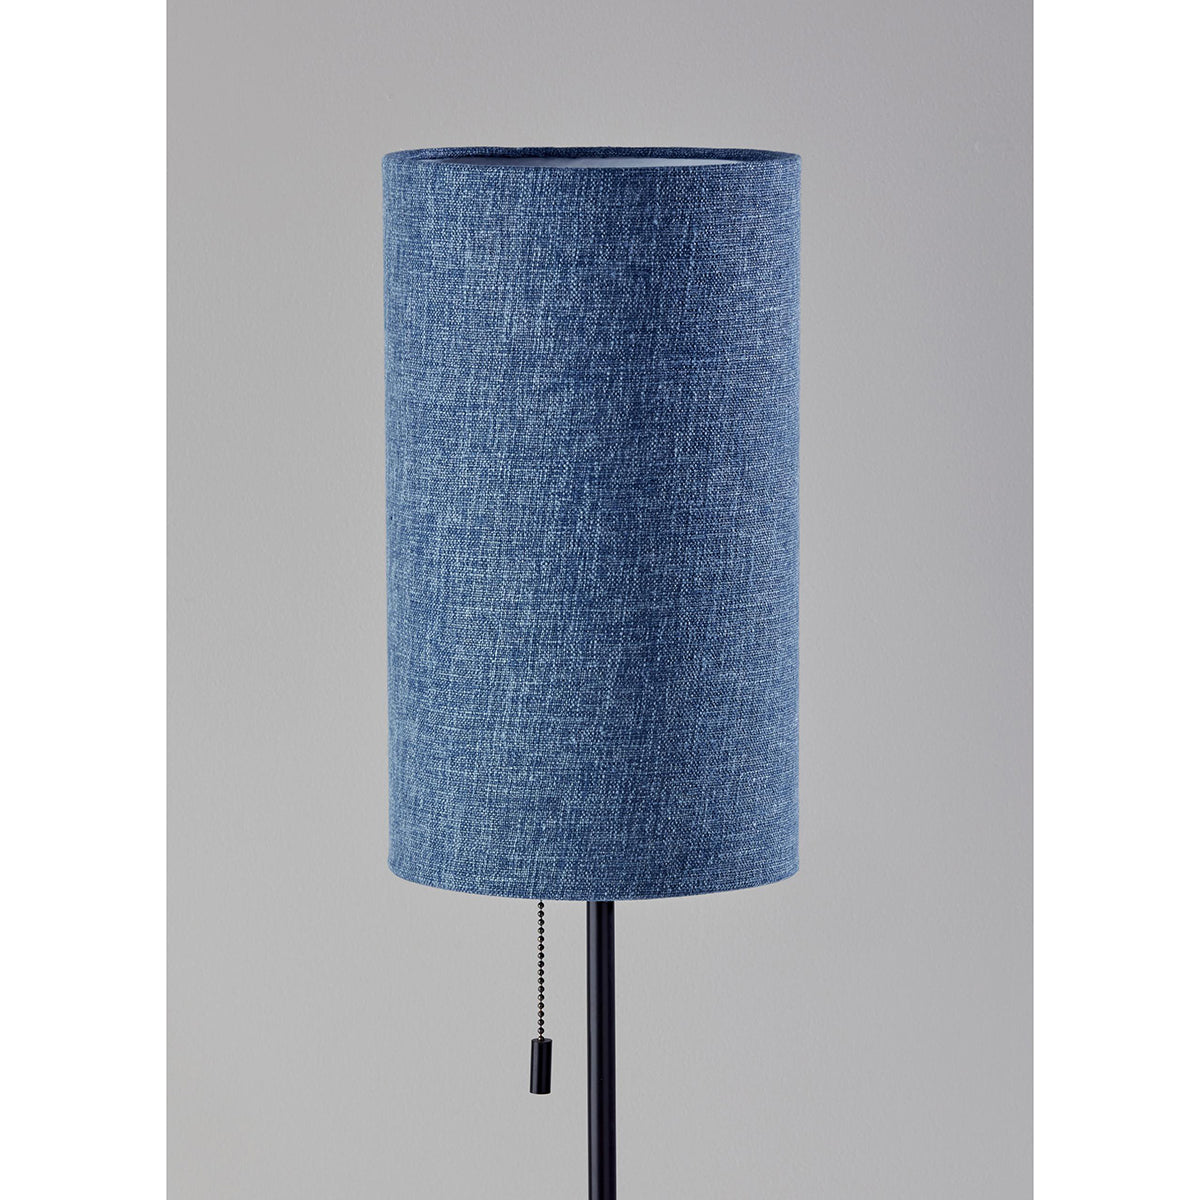 Trudy Table Lamp